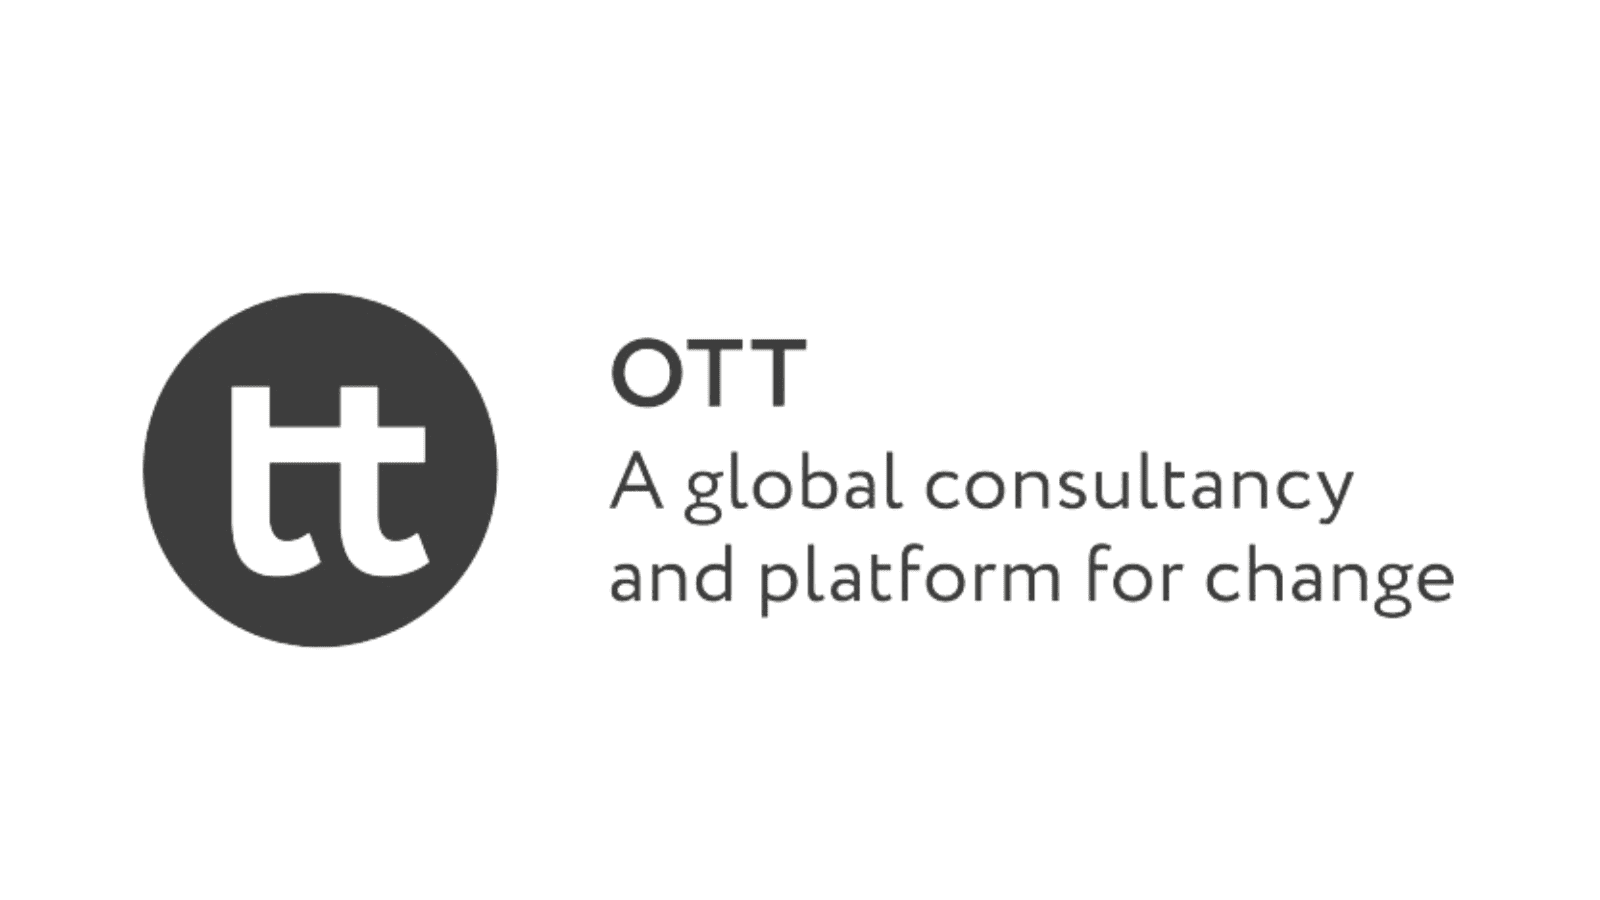 A black circle with the letters "tt" inside in white writing. Next to this are the words "OTT. A global consultancy and platform for change".